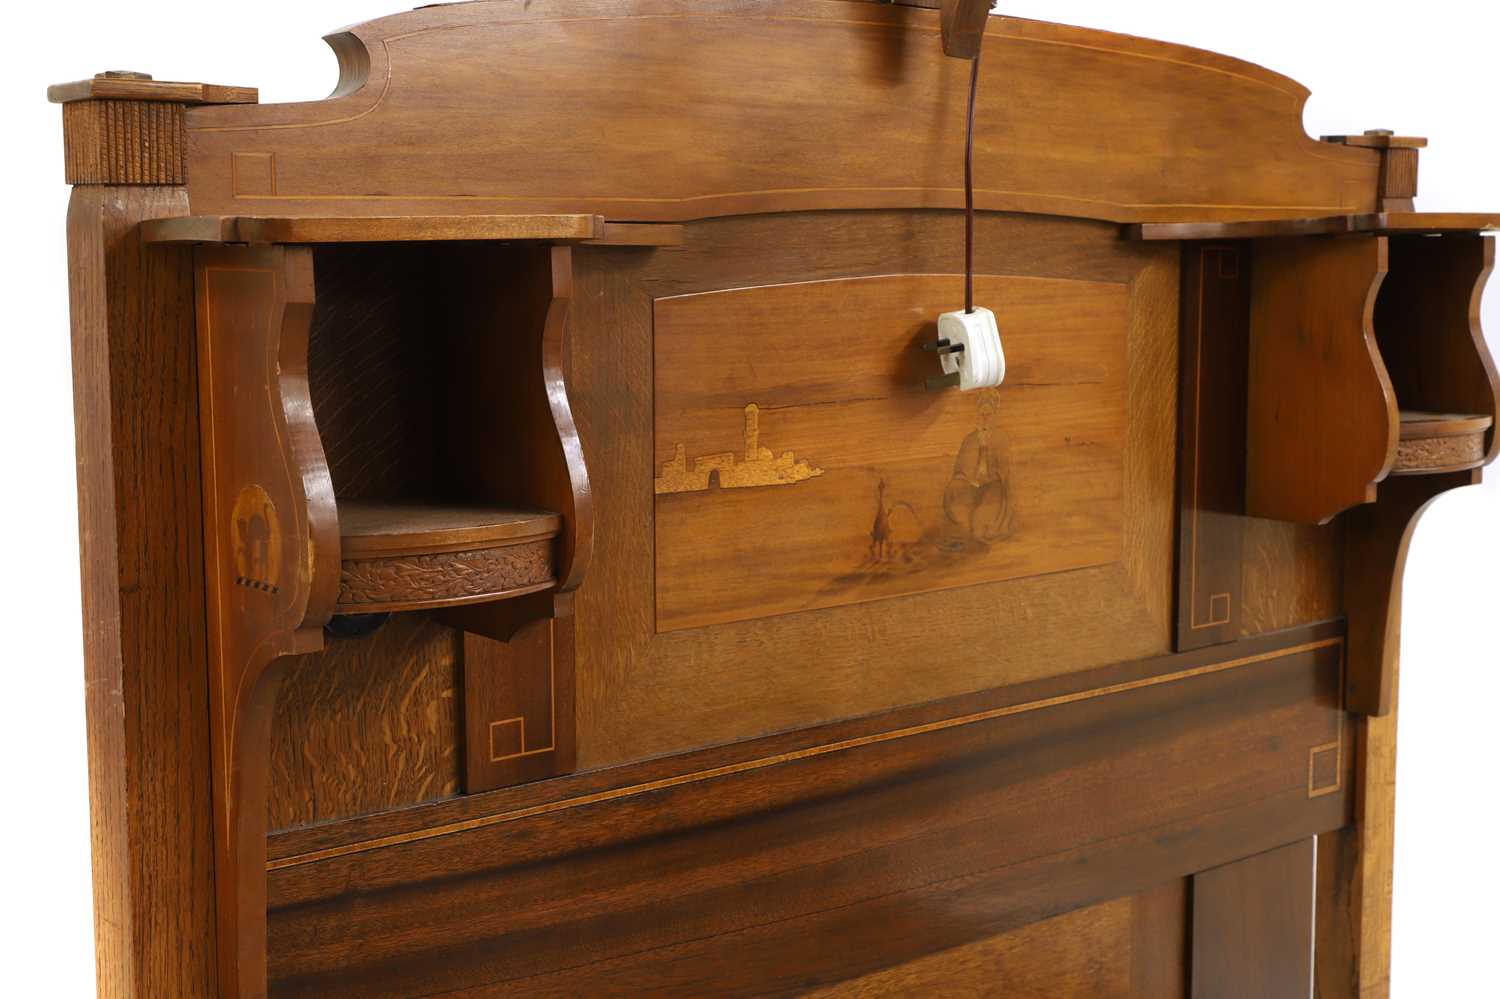 An Edwardian mahogany, oak and parquetry single bed - Image 6 of 10